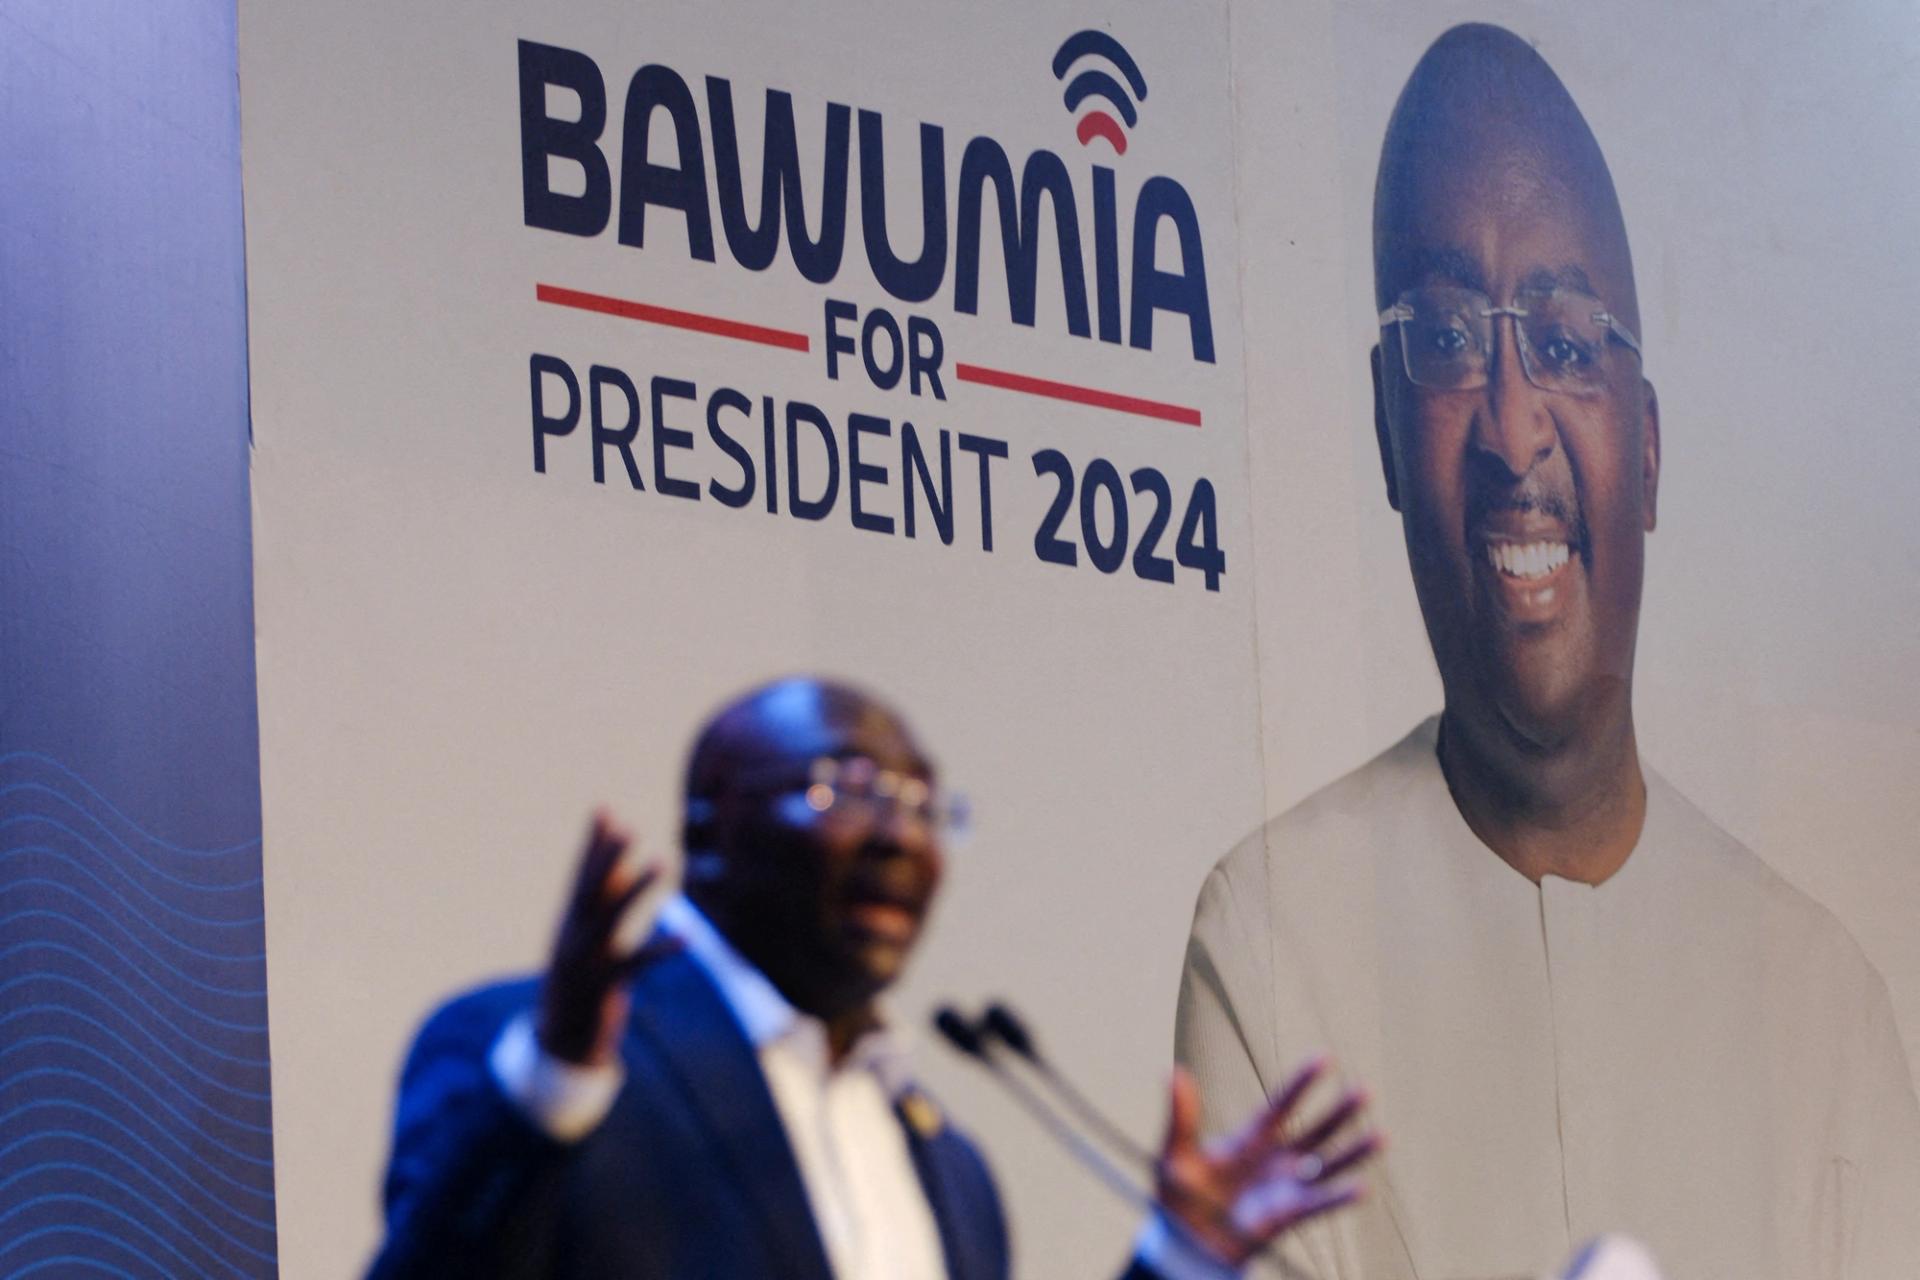 Vice President Mahamudu Bawumia, presidential candidate of Ghana's ruling New Patriotic Party, delivers a speech next to a poster with his picture during his campaign launch event ahead of the 2024 presidential election in Accra, Ghana, on Feb. 7, 2024.